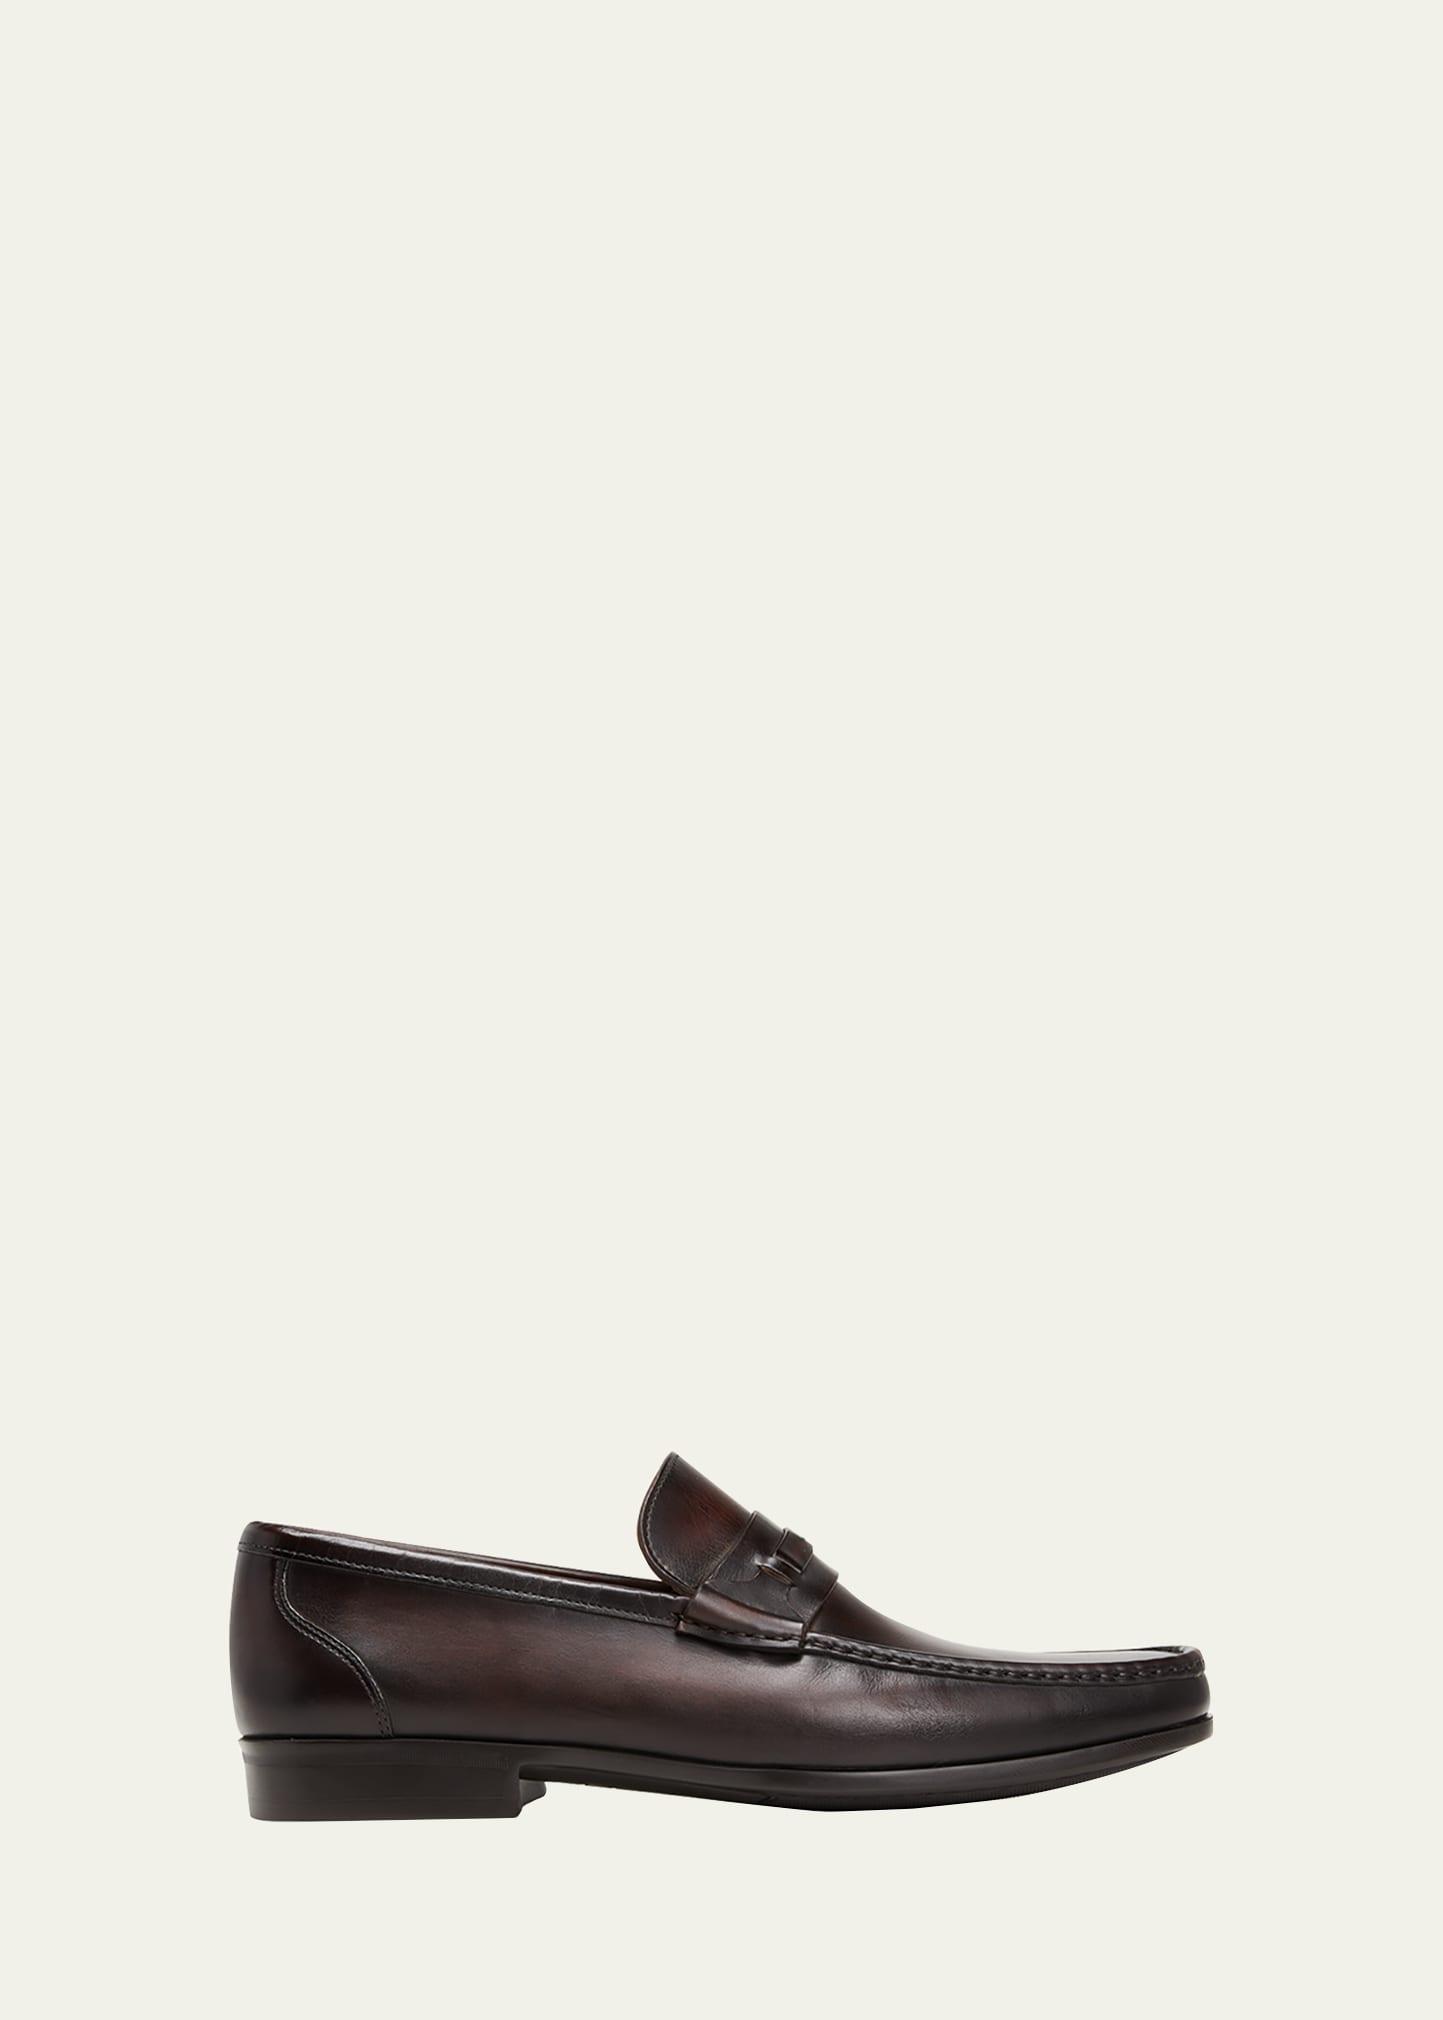 Mens Door Textured Leather Penny Loafers Product Image